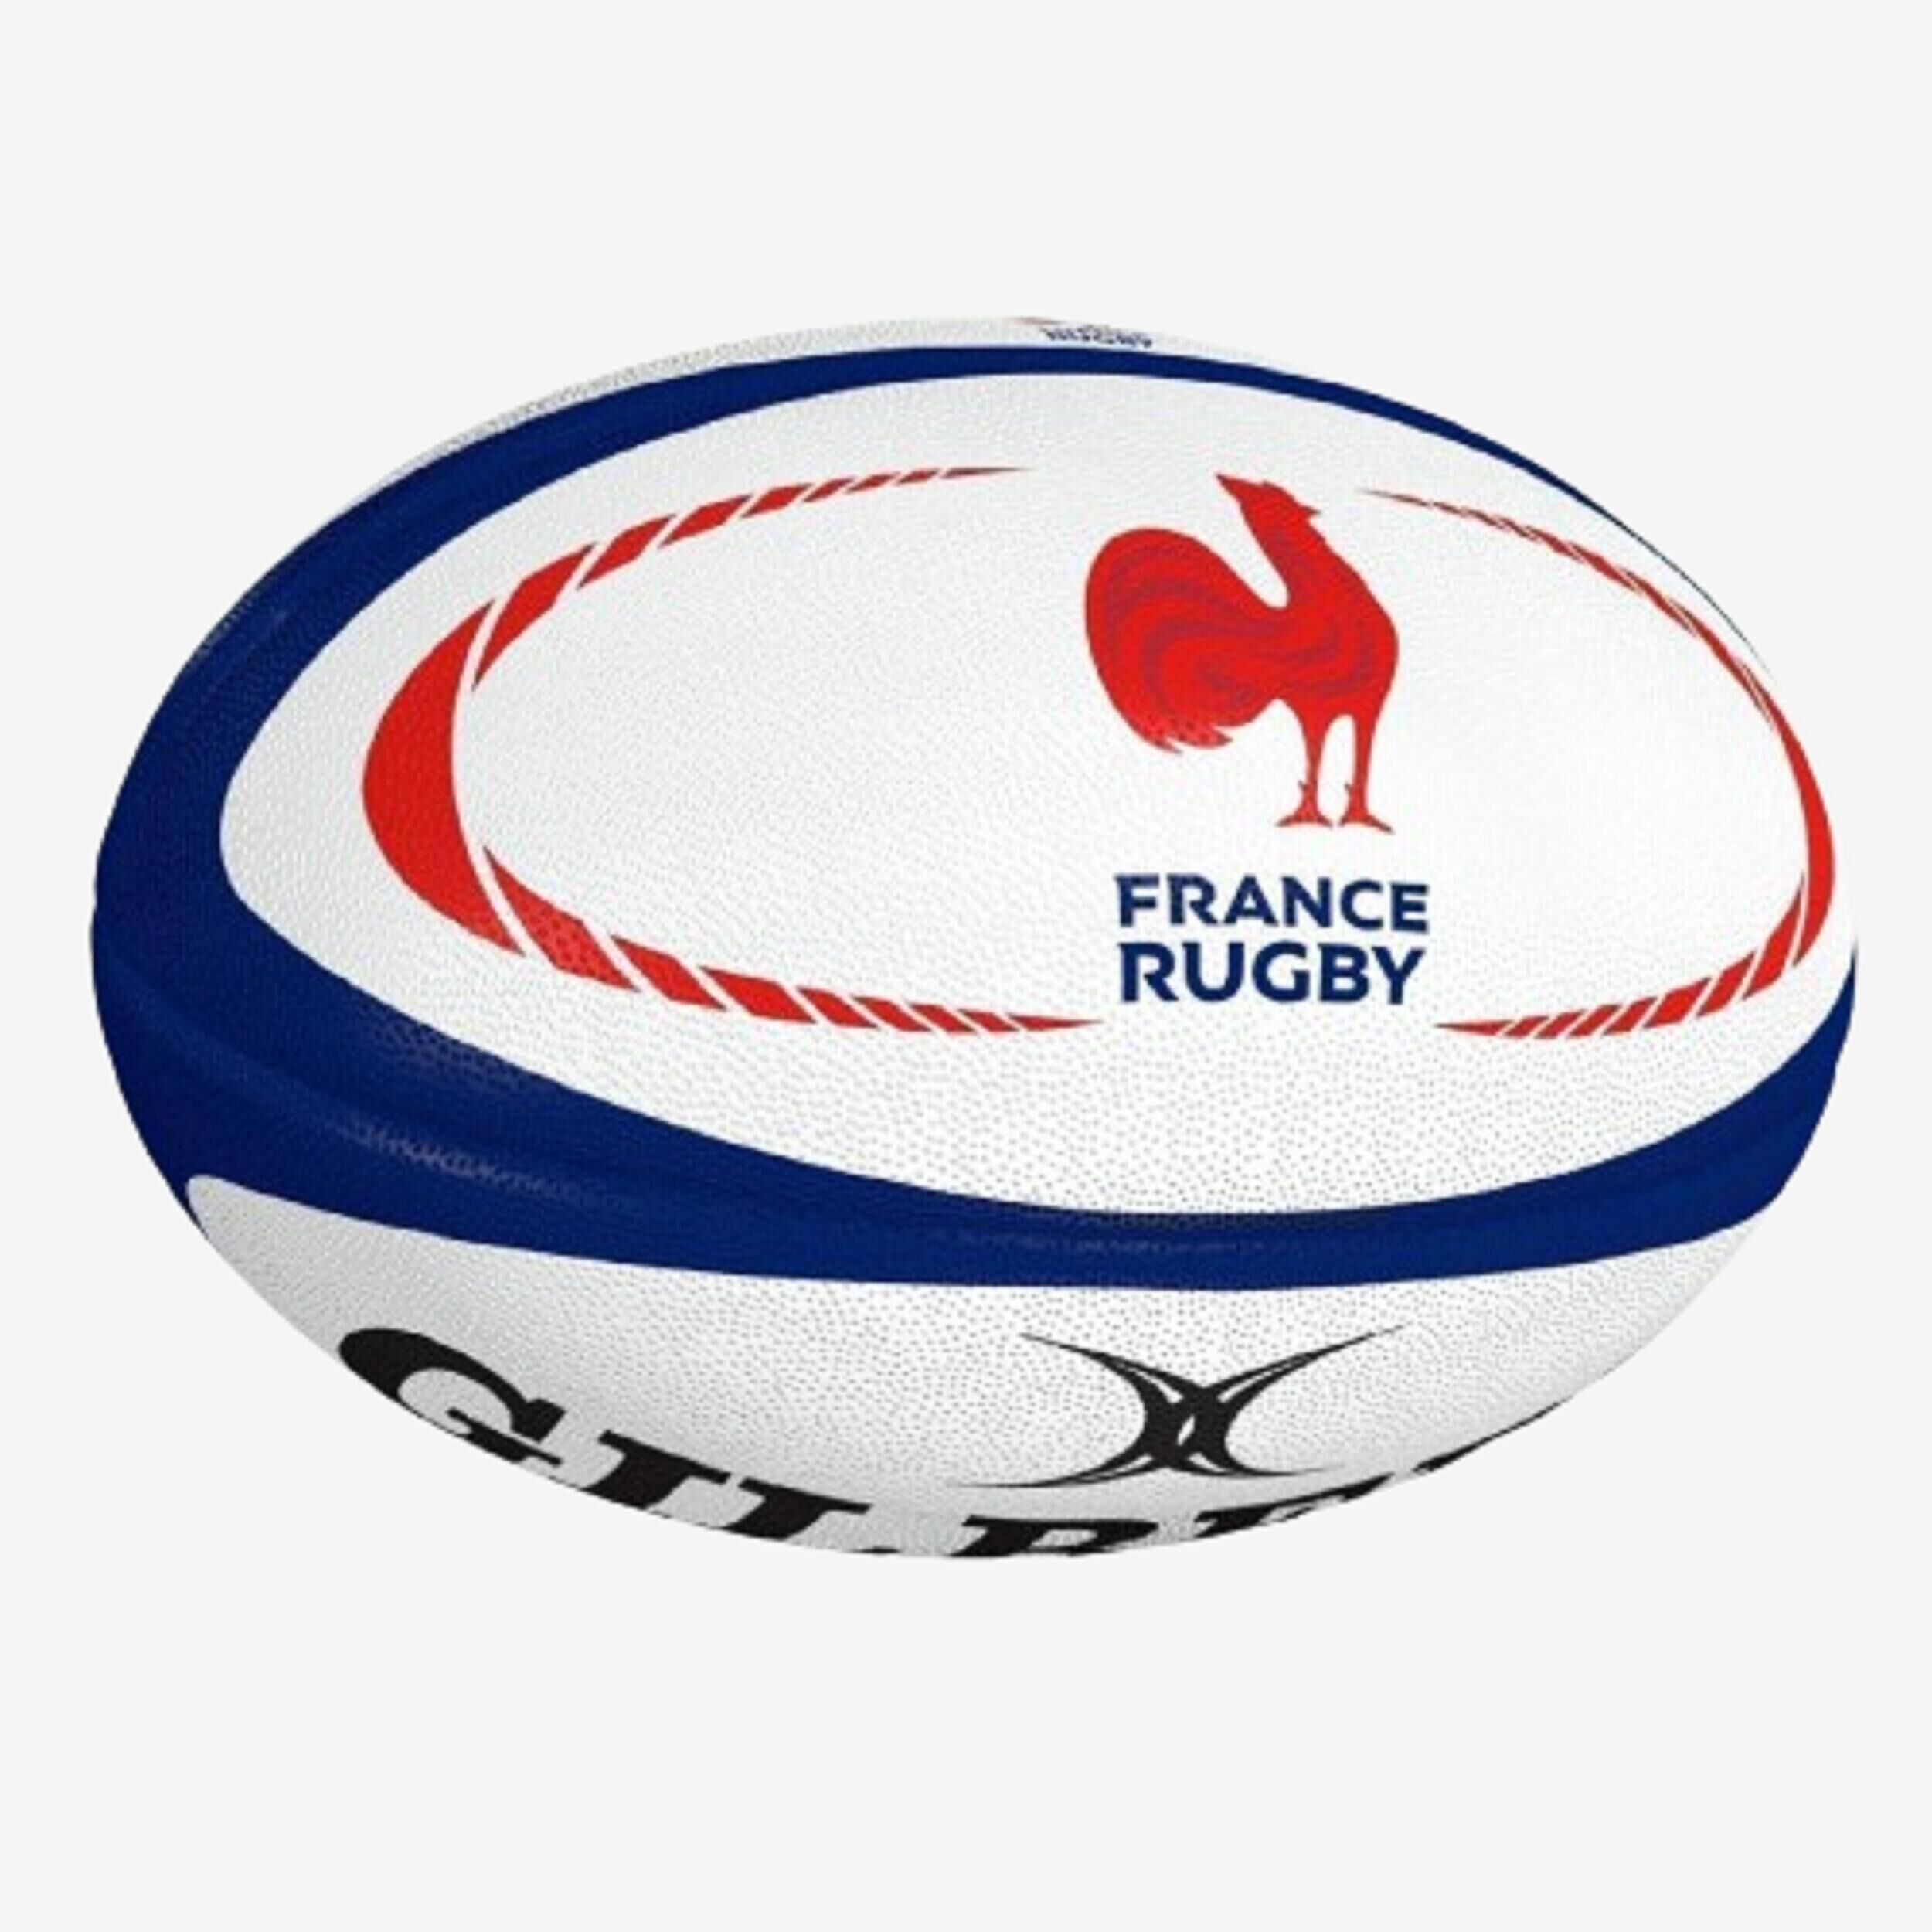 GILBERT Size 5 Rugby Ball France Replica - White/Blue/Red